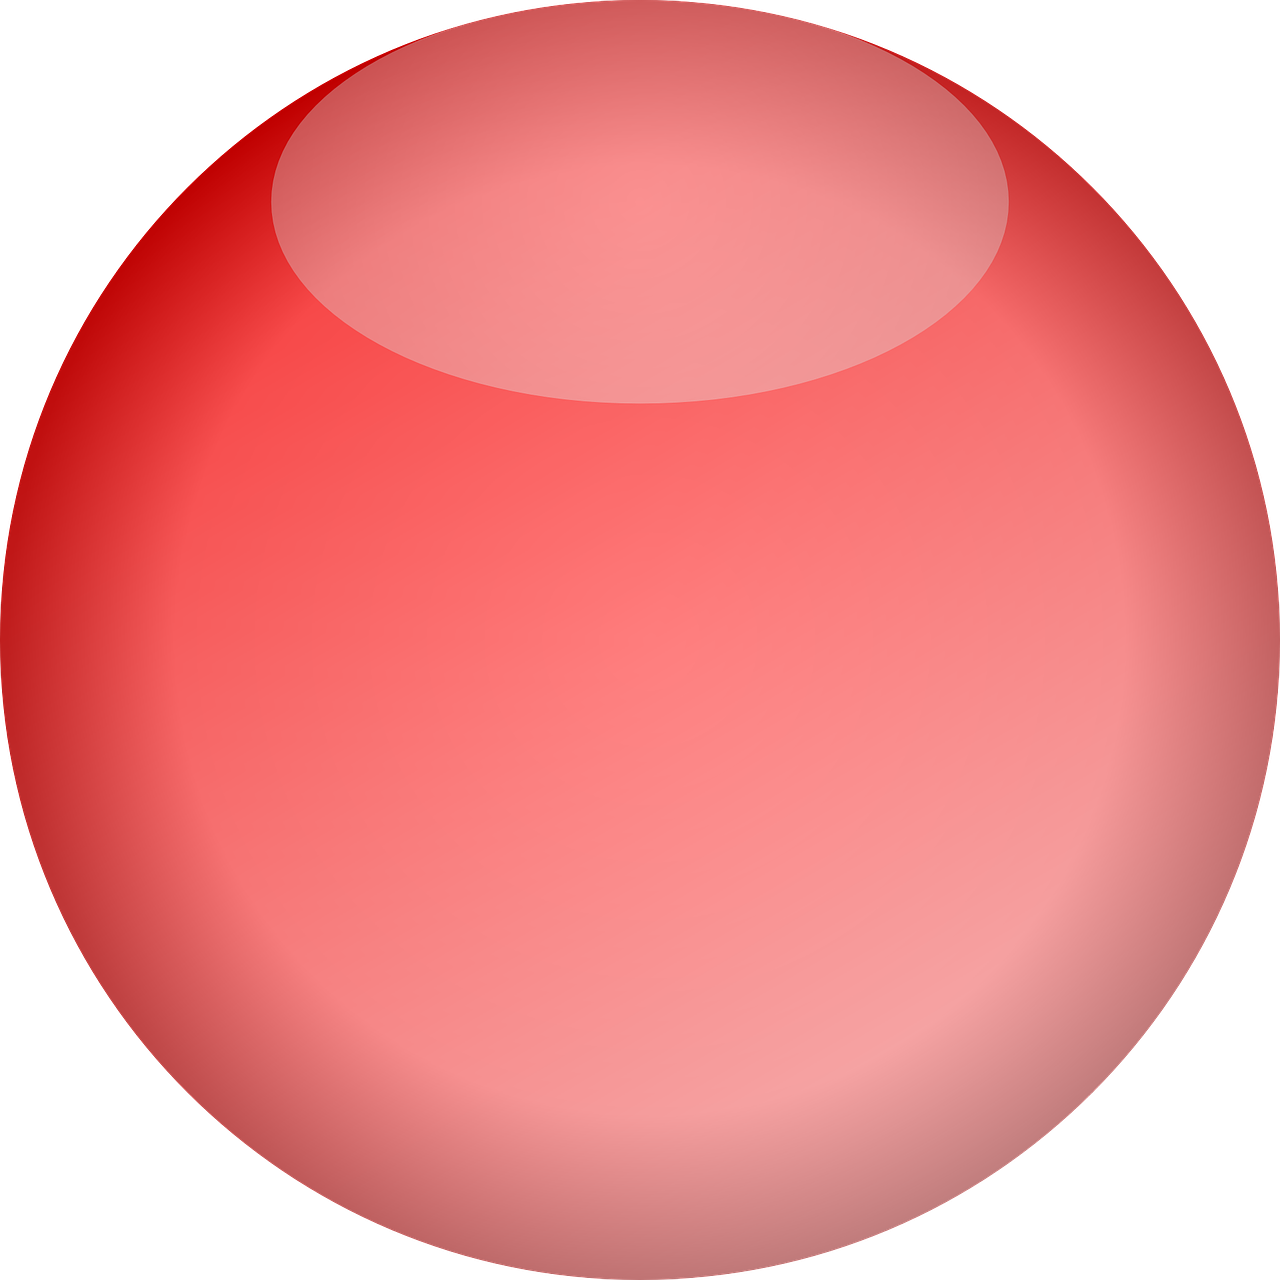 button ball red free photo